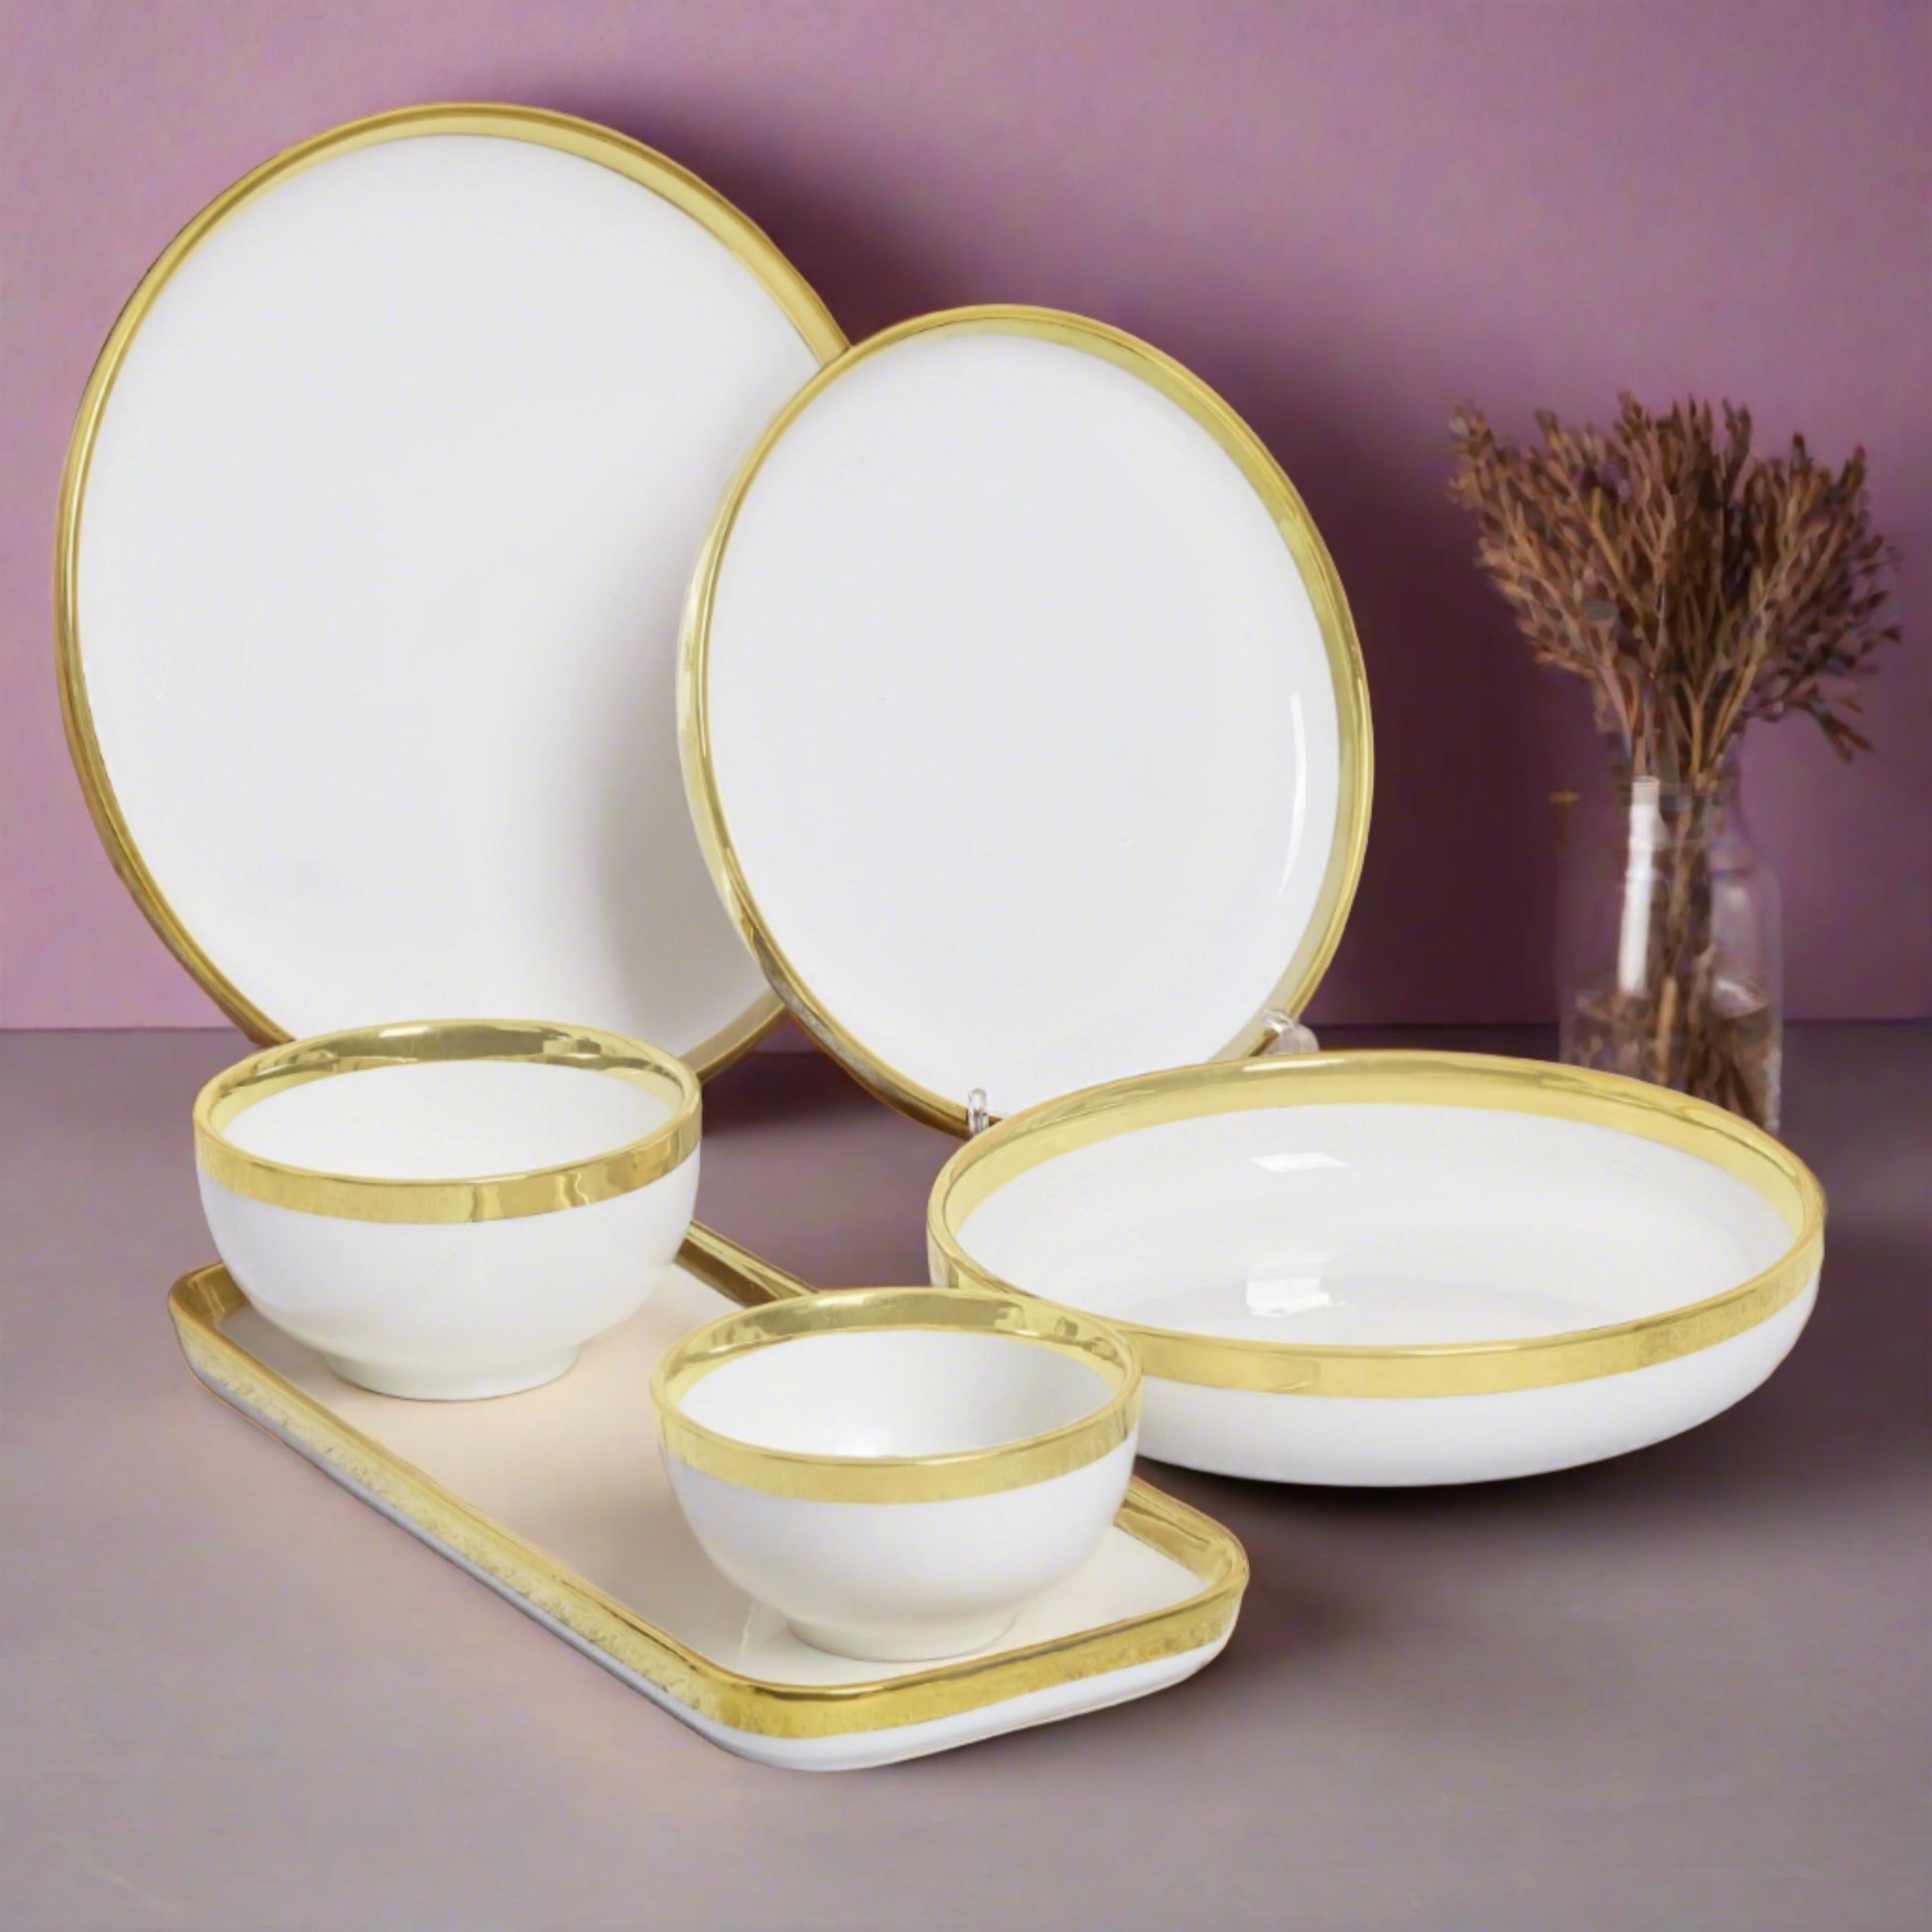 Complete 34-piece ceramic dinnerware set in elegant white finish - ideal for stylish dining occasions